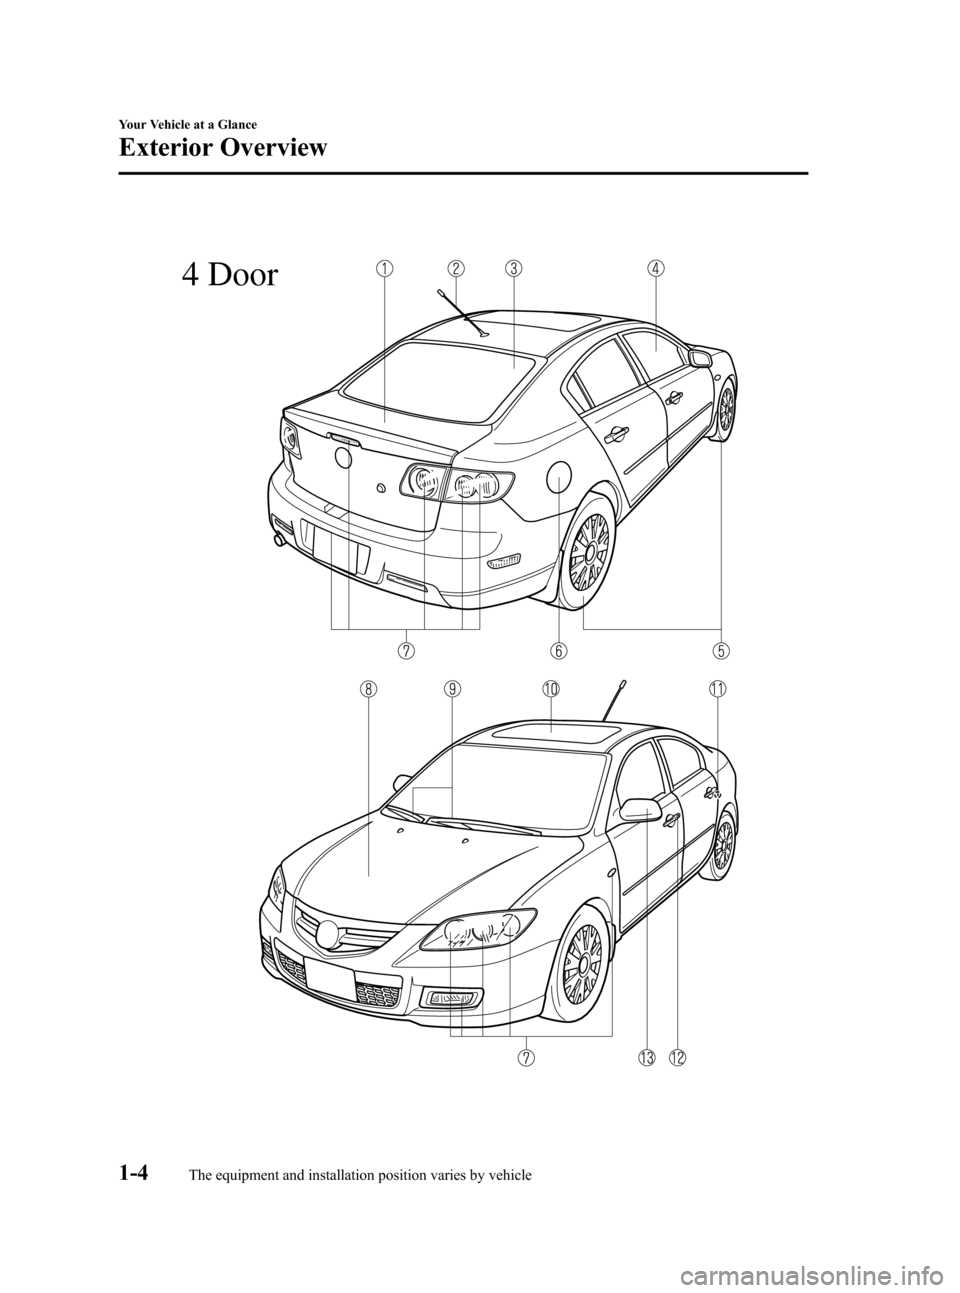 MAZDA MODEL 3 HATCHBACK 2008  Owners Manual (in English) Black plate (10,1)
4 Door
1-4
Your Vehicle at a Glance
The equipment and installation position varies by vehicle
Exterior Overview
Mazda3_8X41-EA-07F_Edition2 Page10
Monday, June 18 2007 1:27 PM
Form 